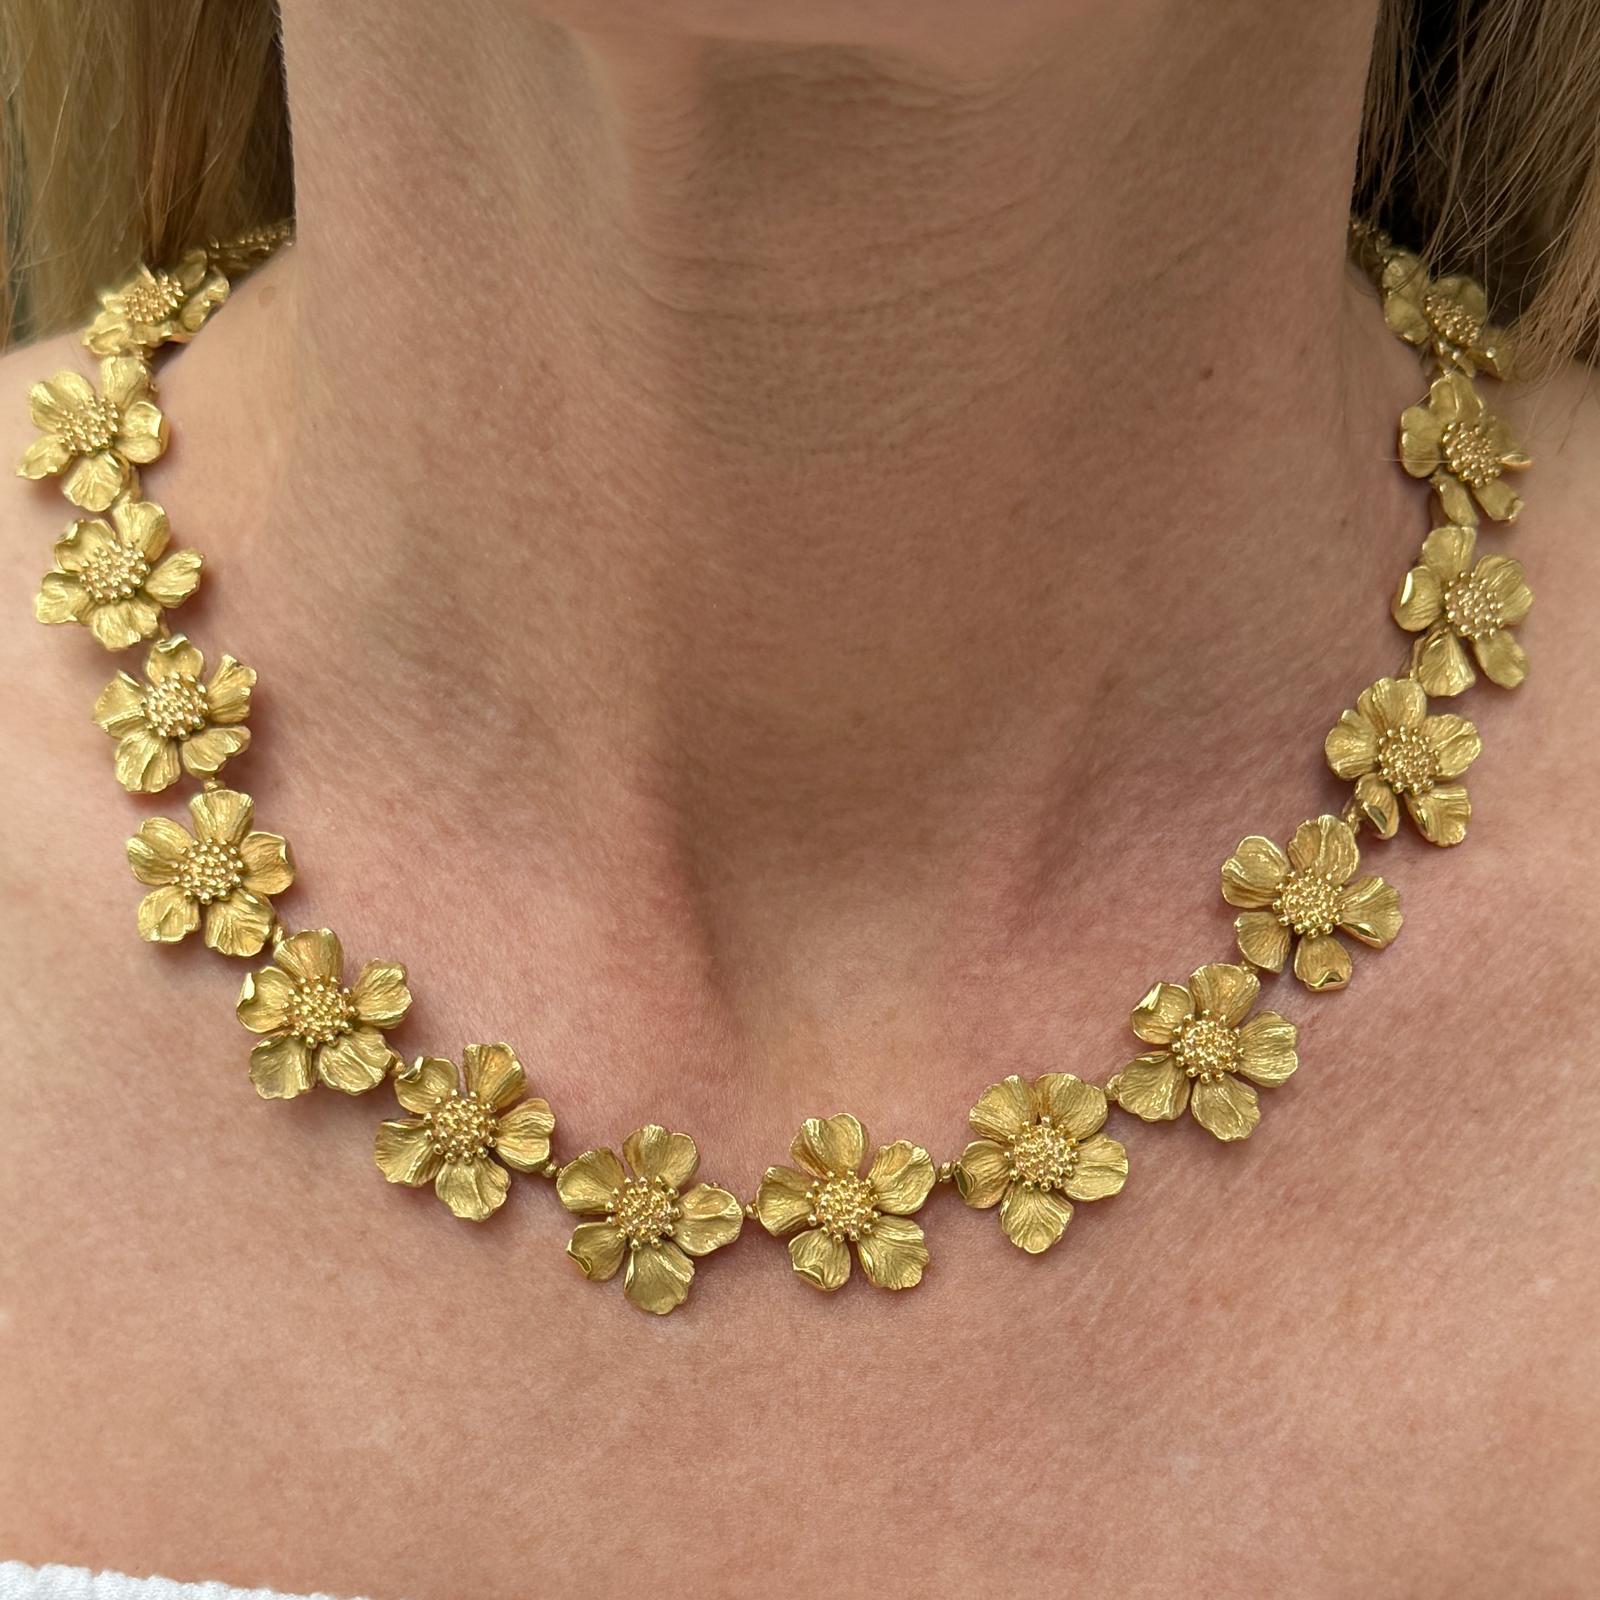 This rare Tiffany & Co Dogwood Wild Rose Flower necklace from the 1990s is a vintage piece crafted with exquisite attention to detail. Made of 18 karat yellow gold, it embodies timeless elegance and sophistication. The necklace features a delicate